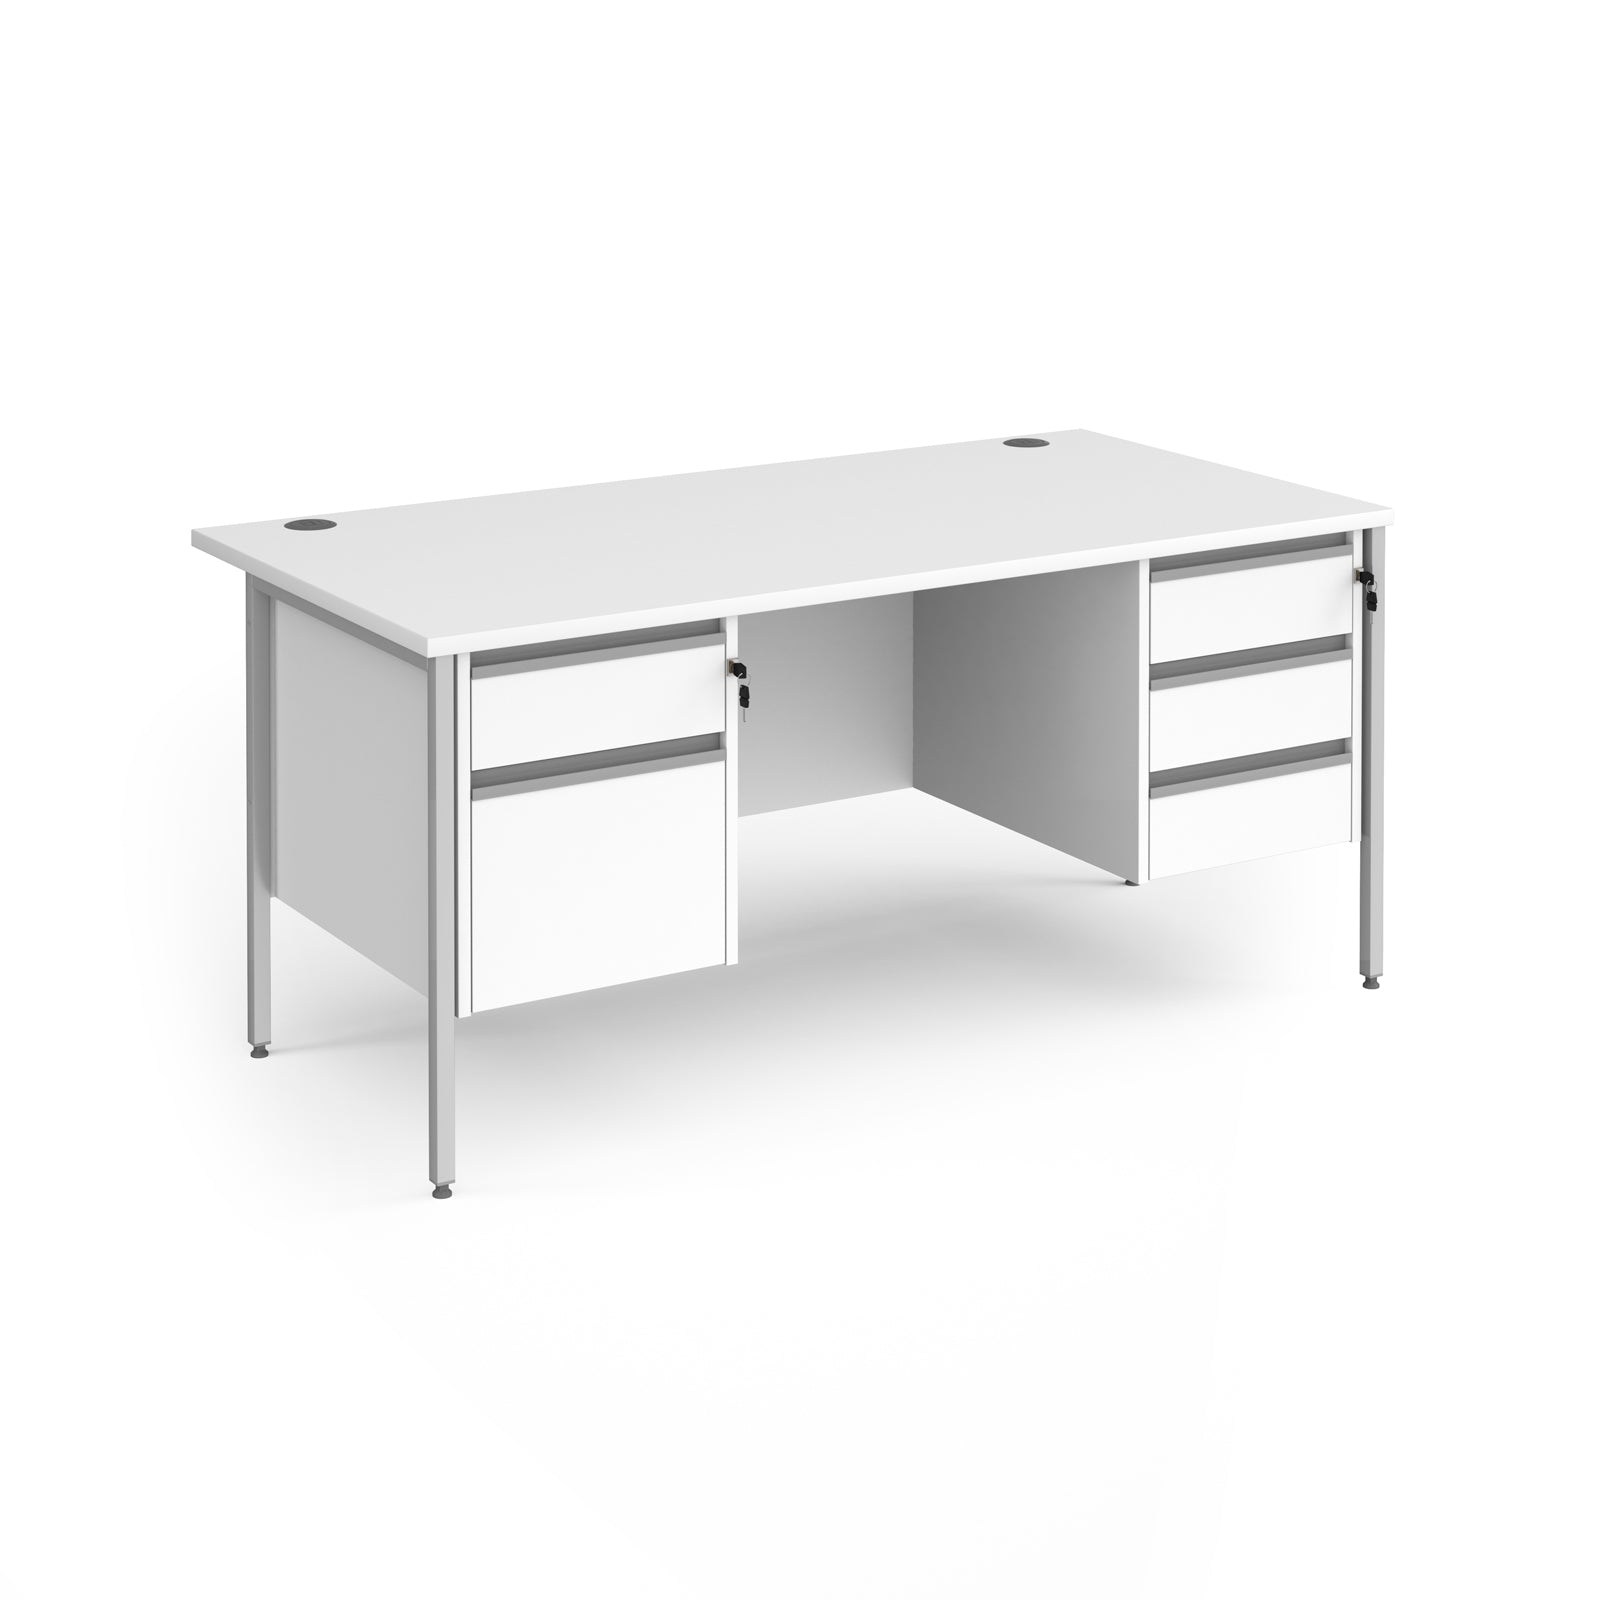 Chicago Desk with H-Frame Legs - 2 and 3 Pedestals